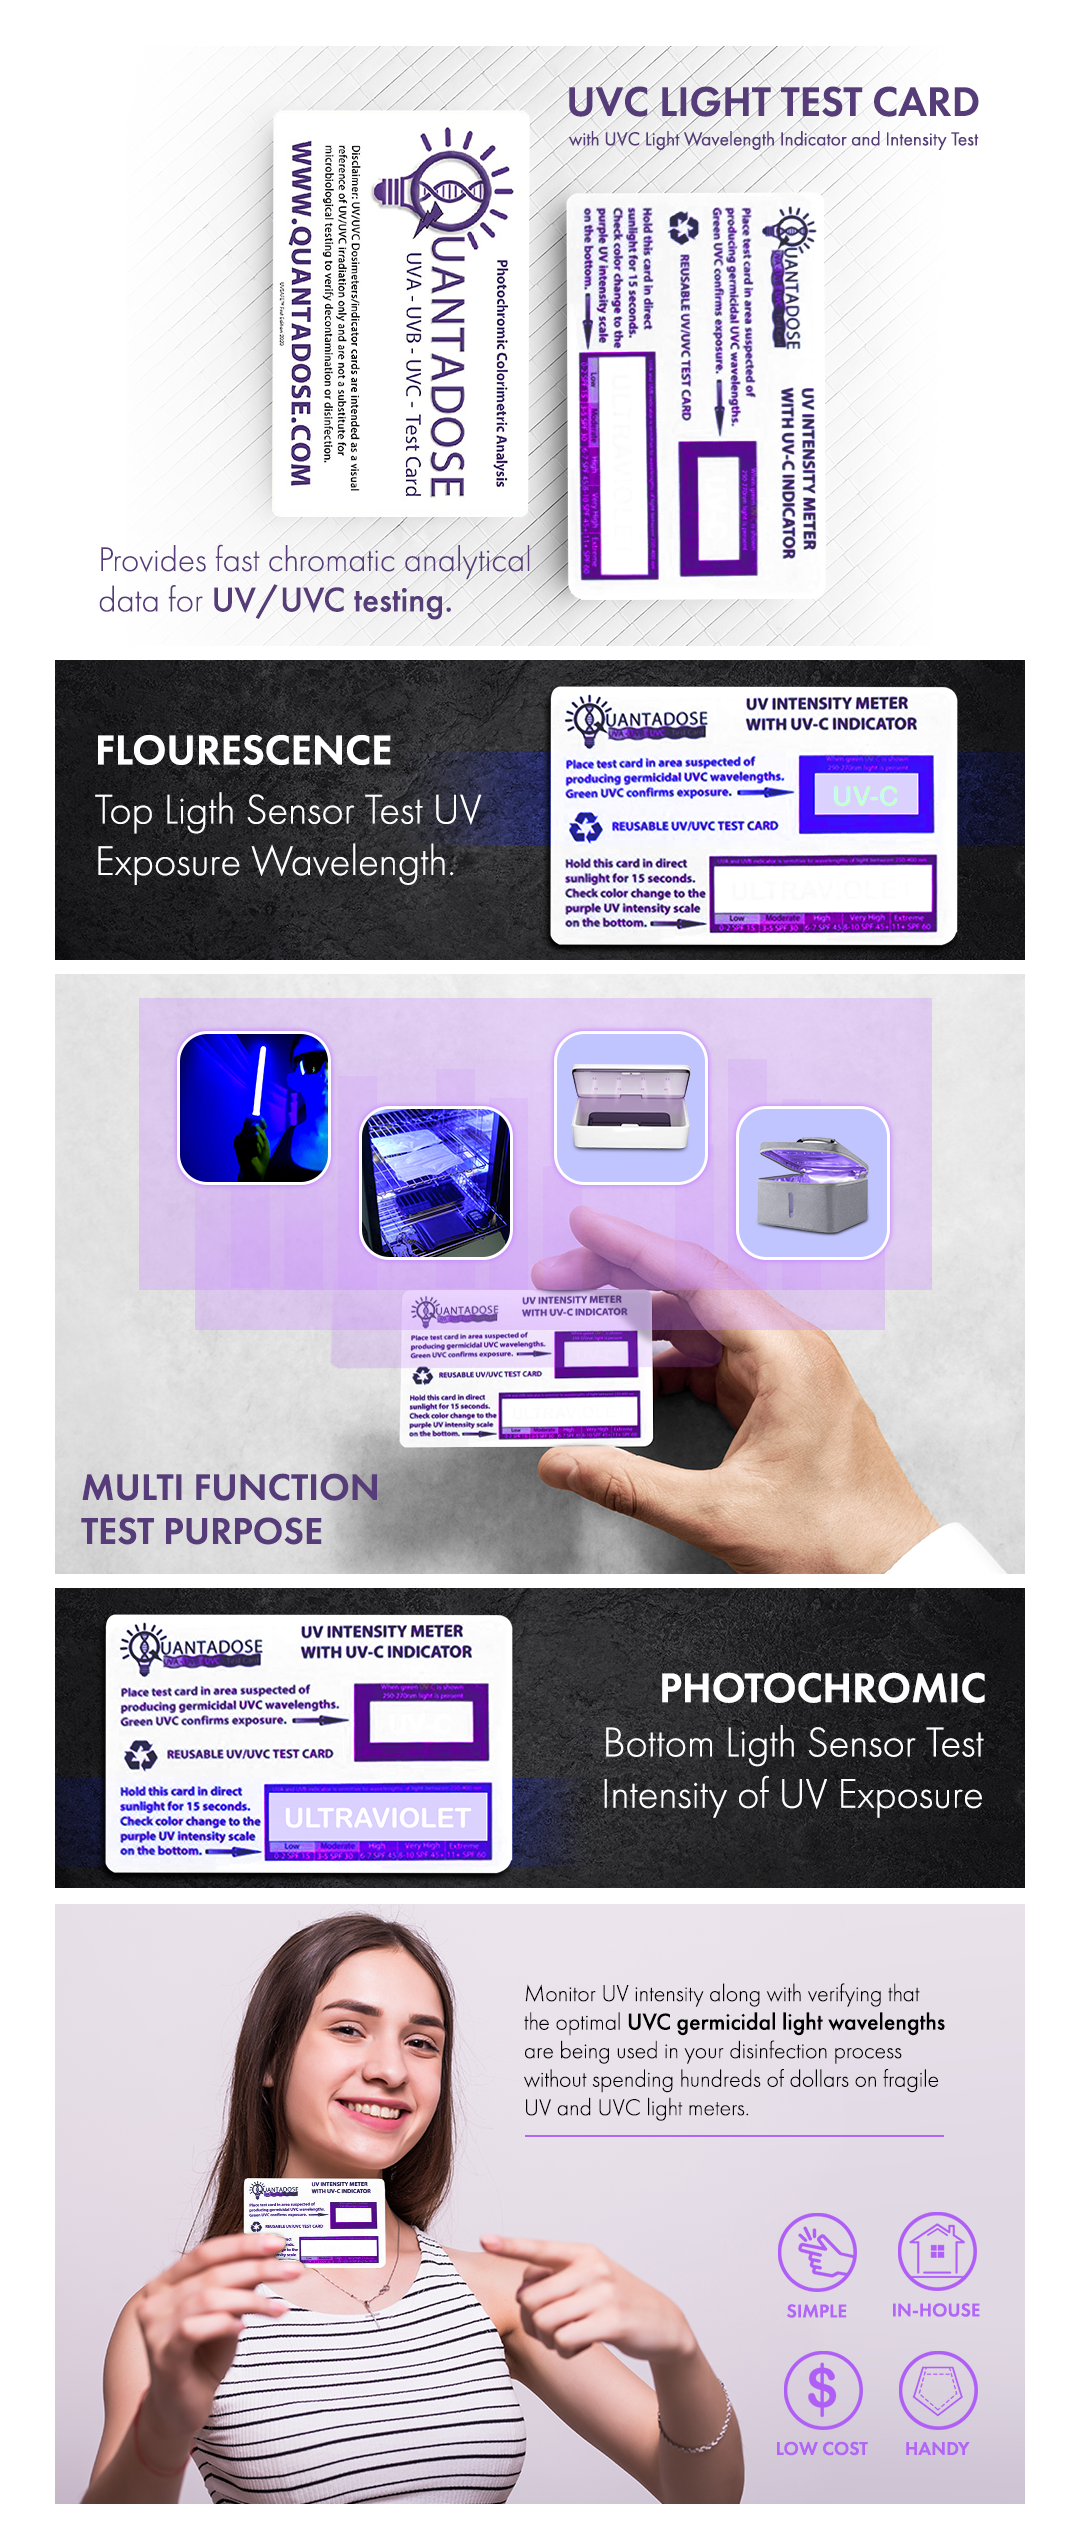 QuantaDose Infographic two-part UV test for UVC test result